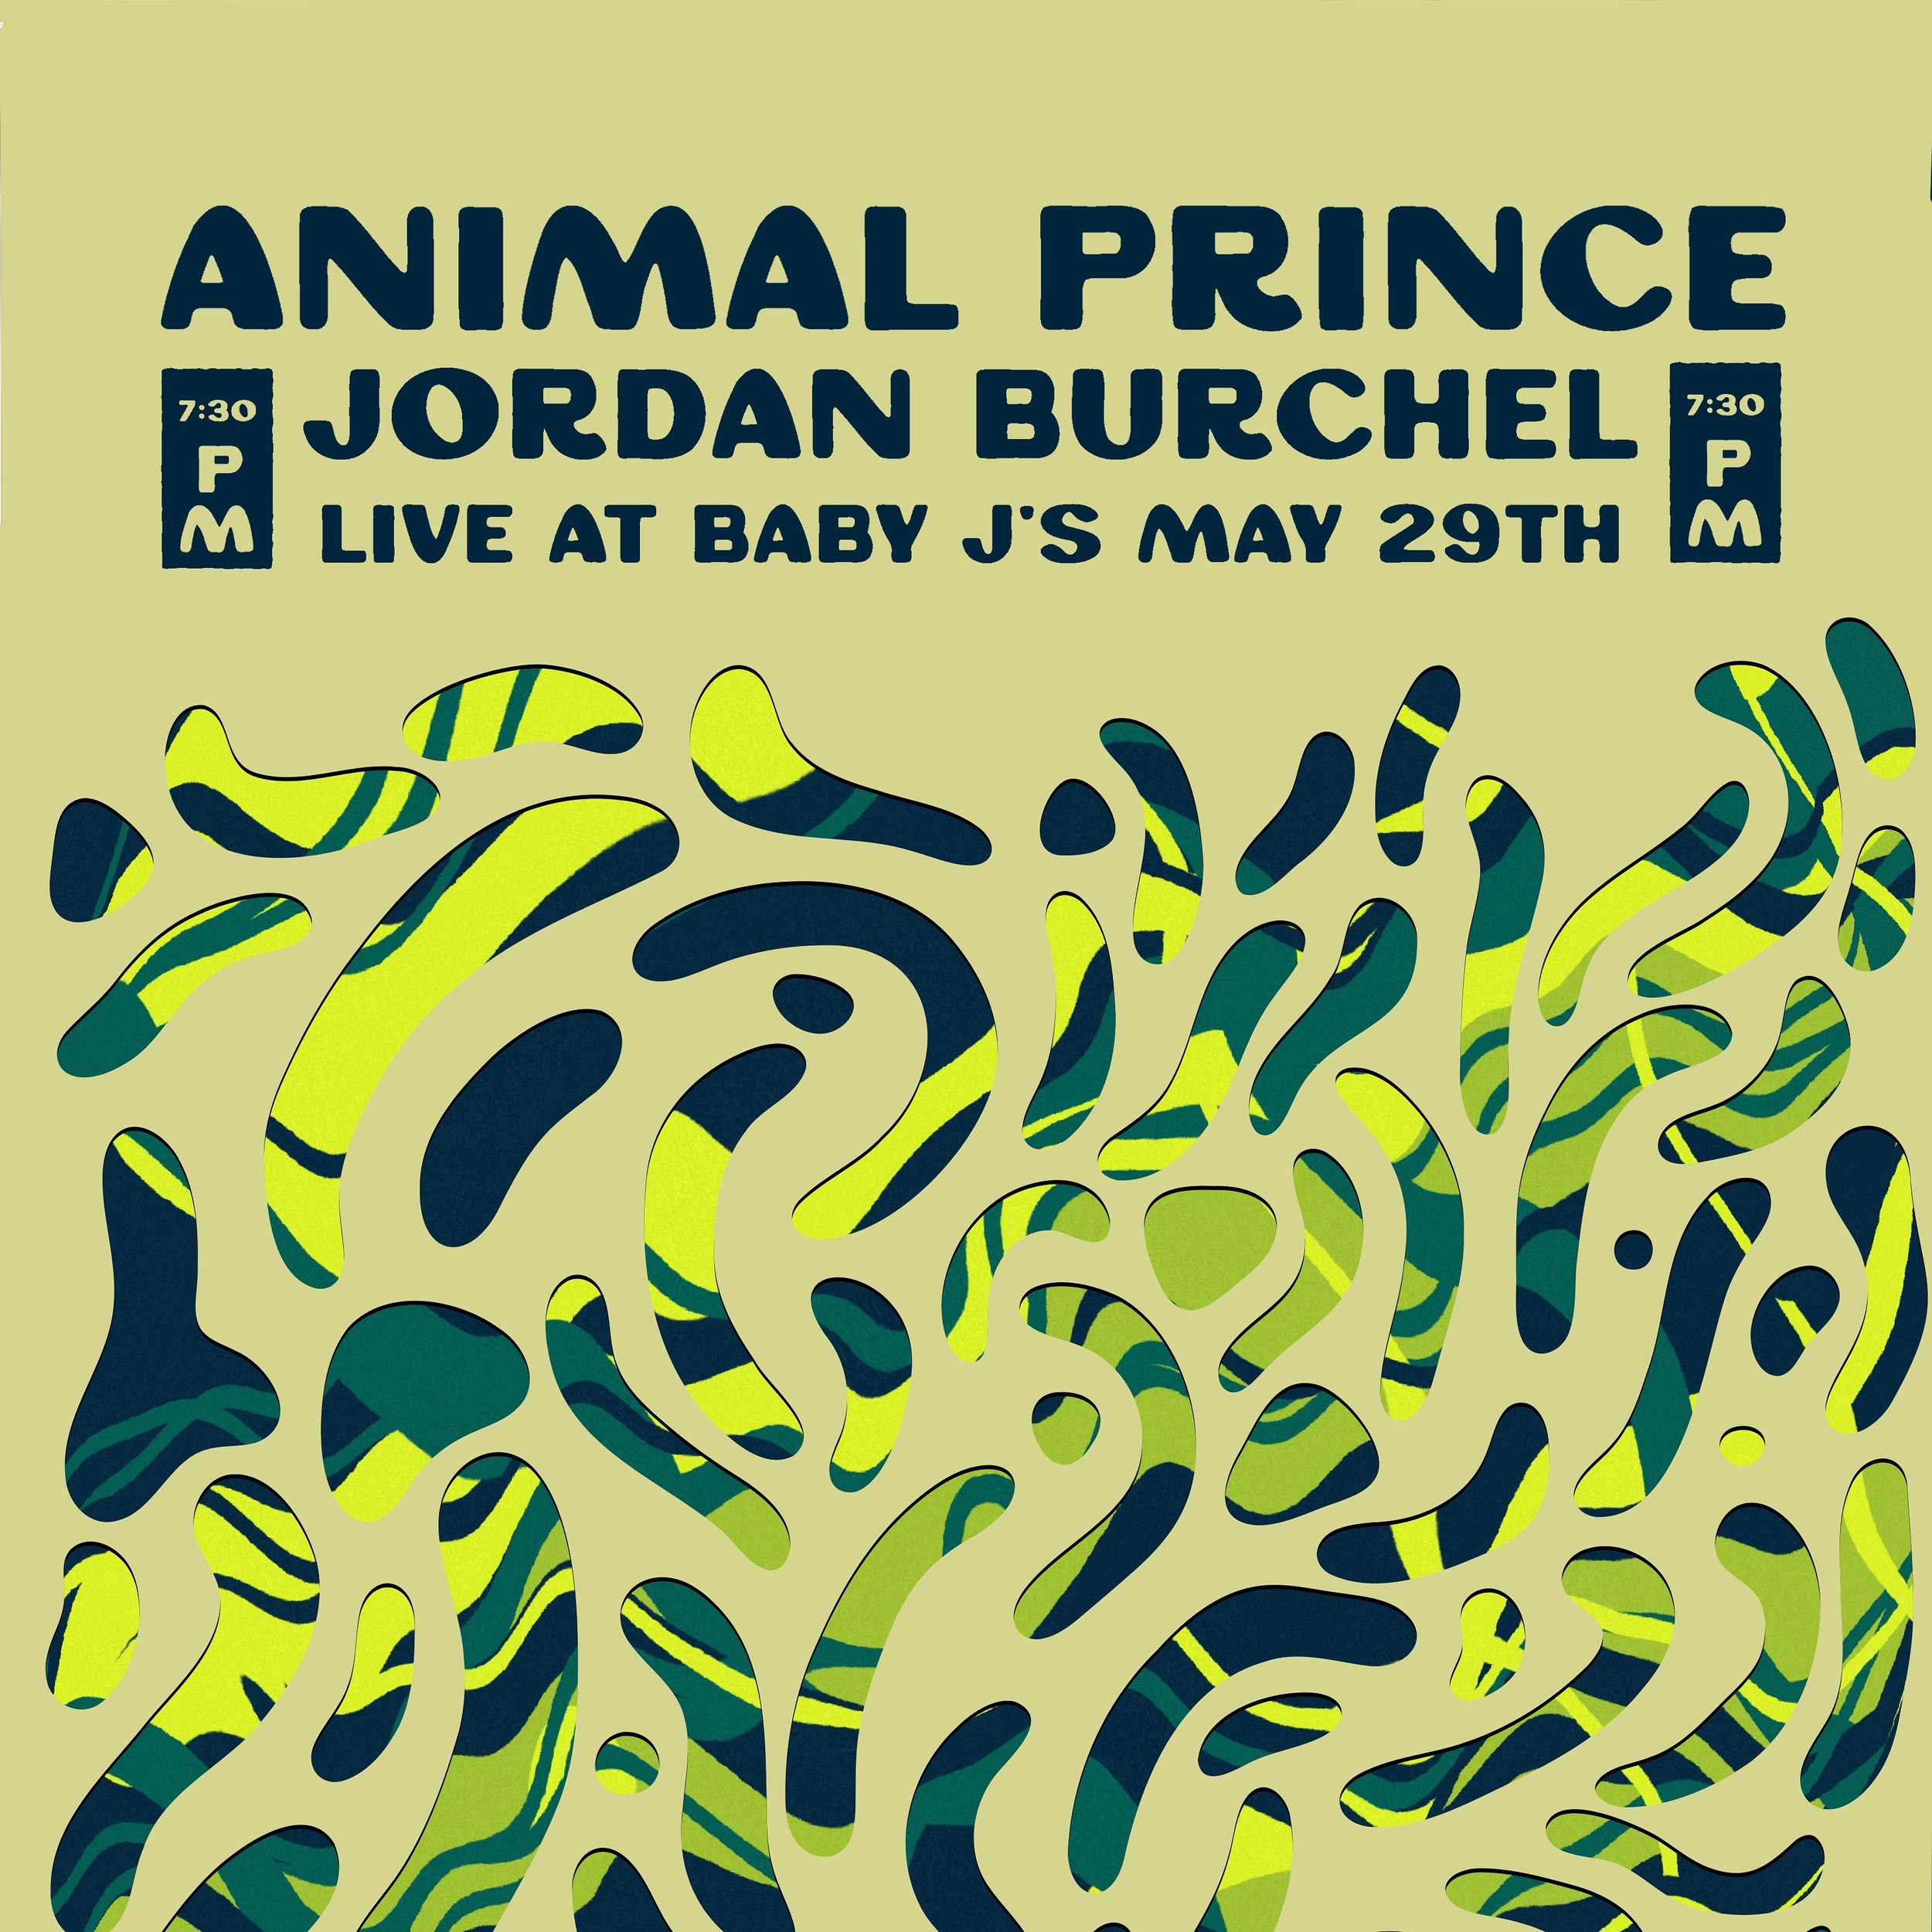 Super excited to announce that the band and I will be opening for @animalprince_ at @babyjsbar on May 29th -7:30pm ✨

We&rsquo;re putting together a special set of lower key musical moments for you. Maybe we&rsquo;ll throw a new song in the mix? We&r